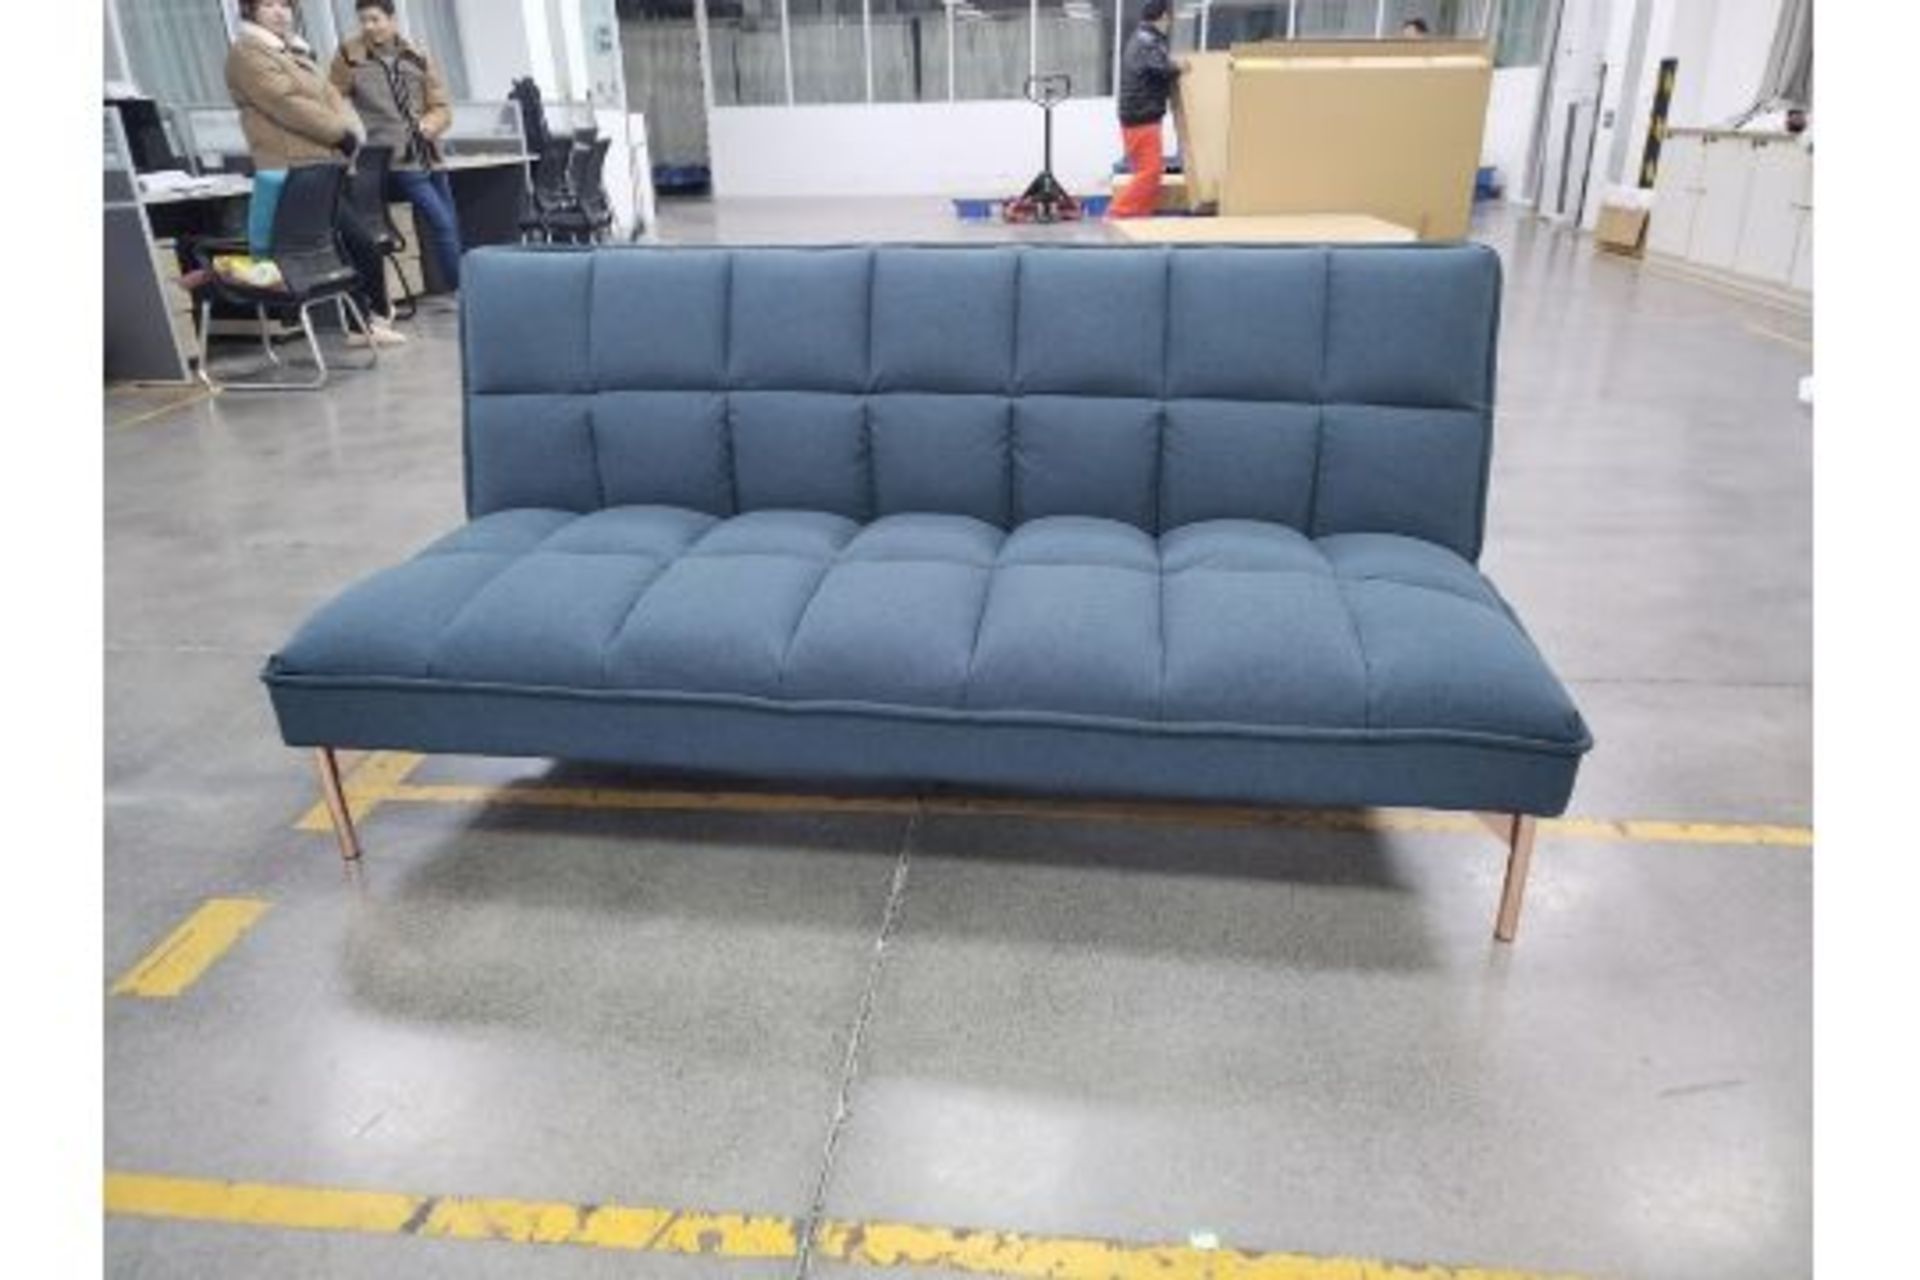 New & Boxed Made.com Hallie Click Clack Sofa Bed. Aegean Blue with Copper Legs. RRP £1,449. - Image 3 of 5